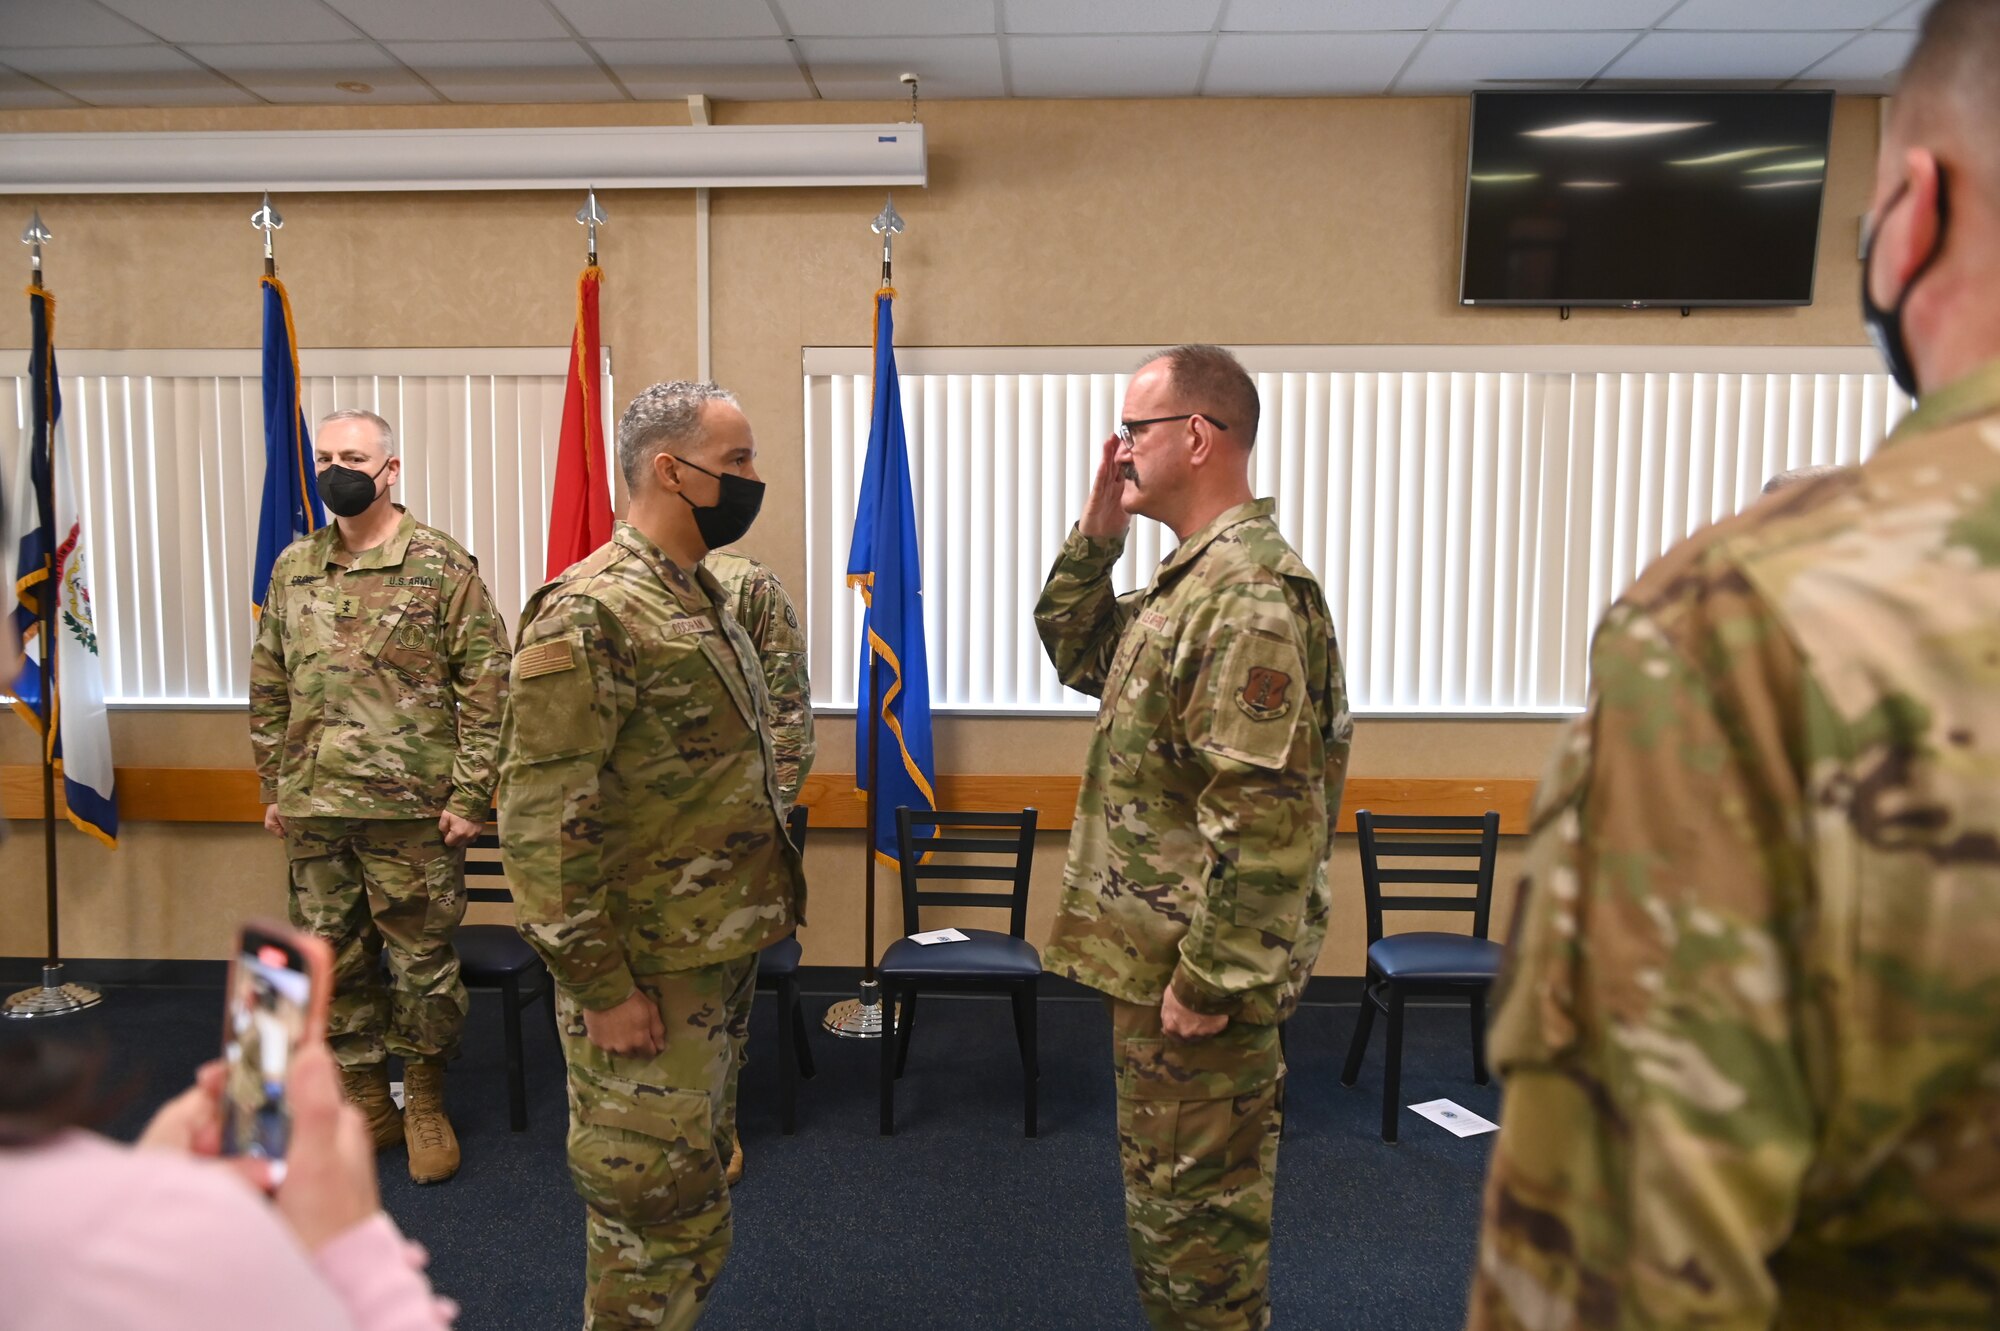 Chief Master Sgt. David Stevens gives his final salute as West Virginia Air National Guard state command chief to Brig. Gen. David Cochran, assistant adjutant general-Air, West Virginia National Guard, during a state command chief change of responsibility ceremony at the 167th Airlift Wing dining facility, Martinsburg, West Virginia, Feb. 5, 2022. The ceremony was held to mark the transition of the West Virginia Air National Guard state command from Chief Master Sgt. David Stevens to Chief Master Sgt. Brandon Ives.